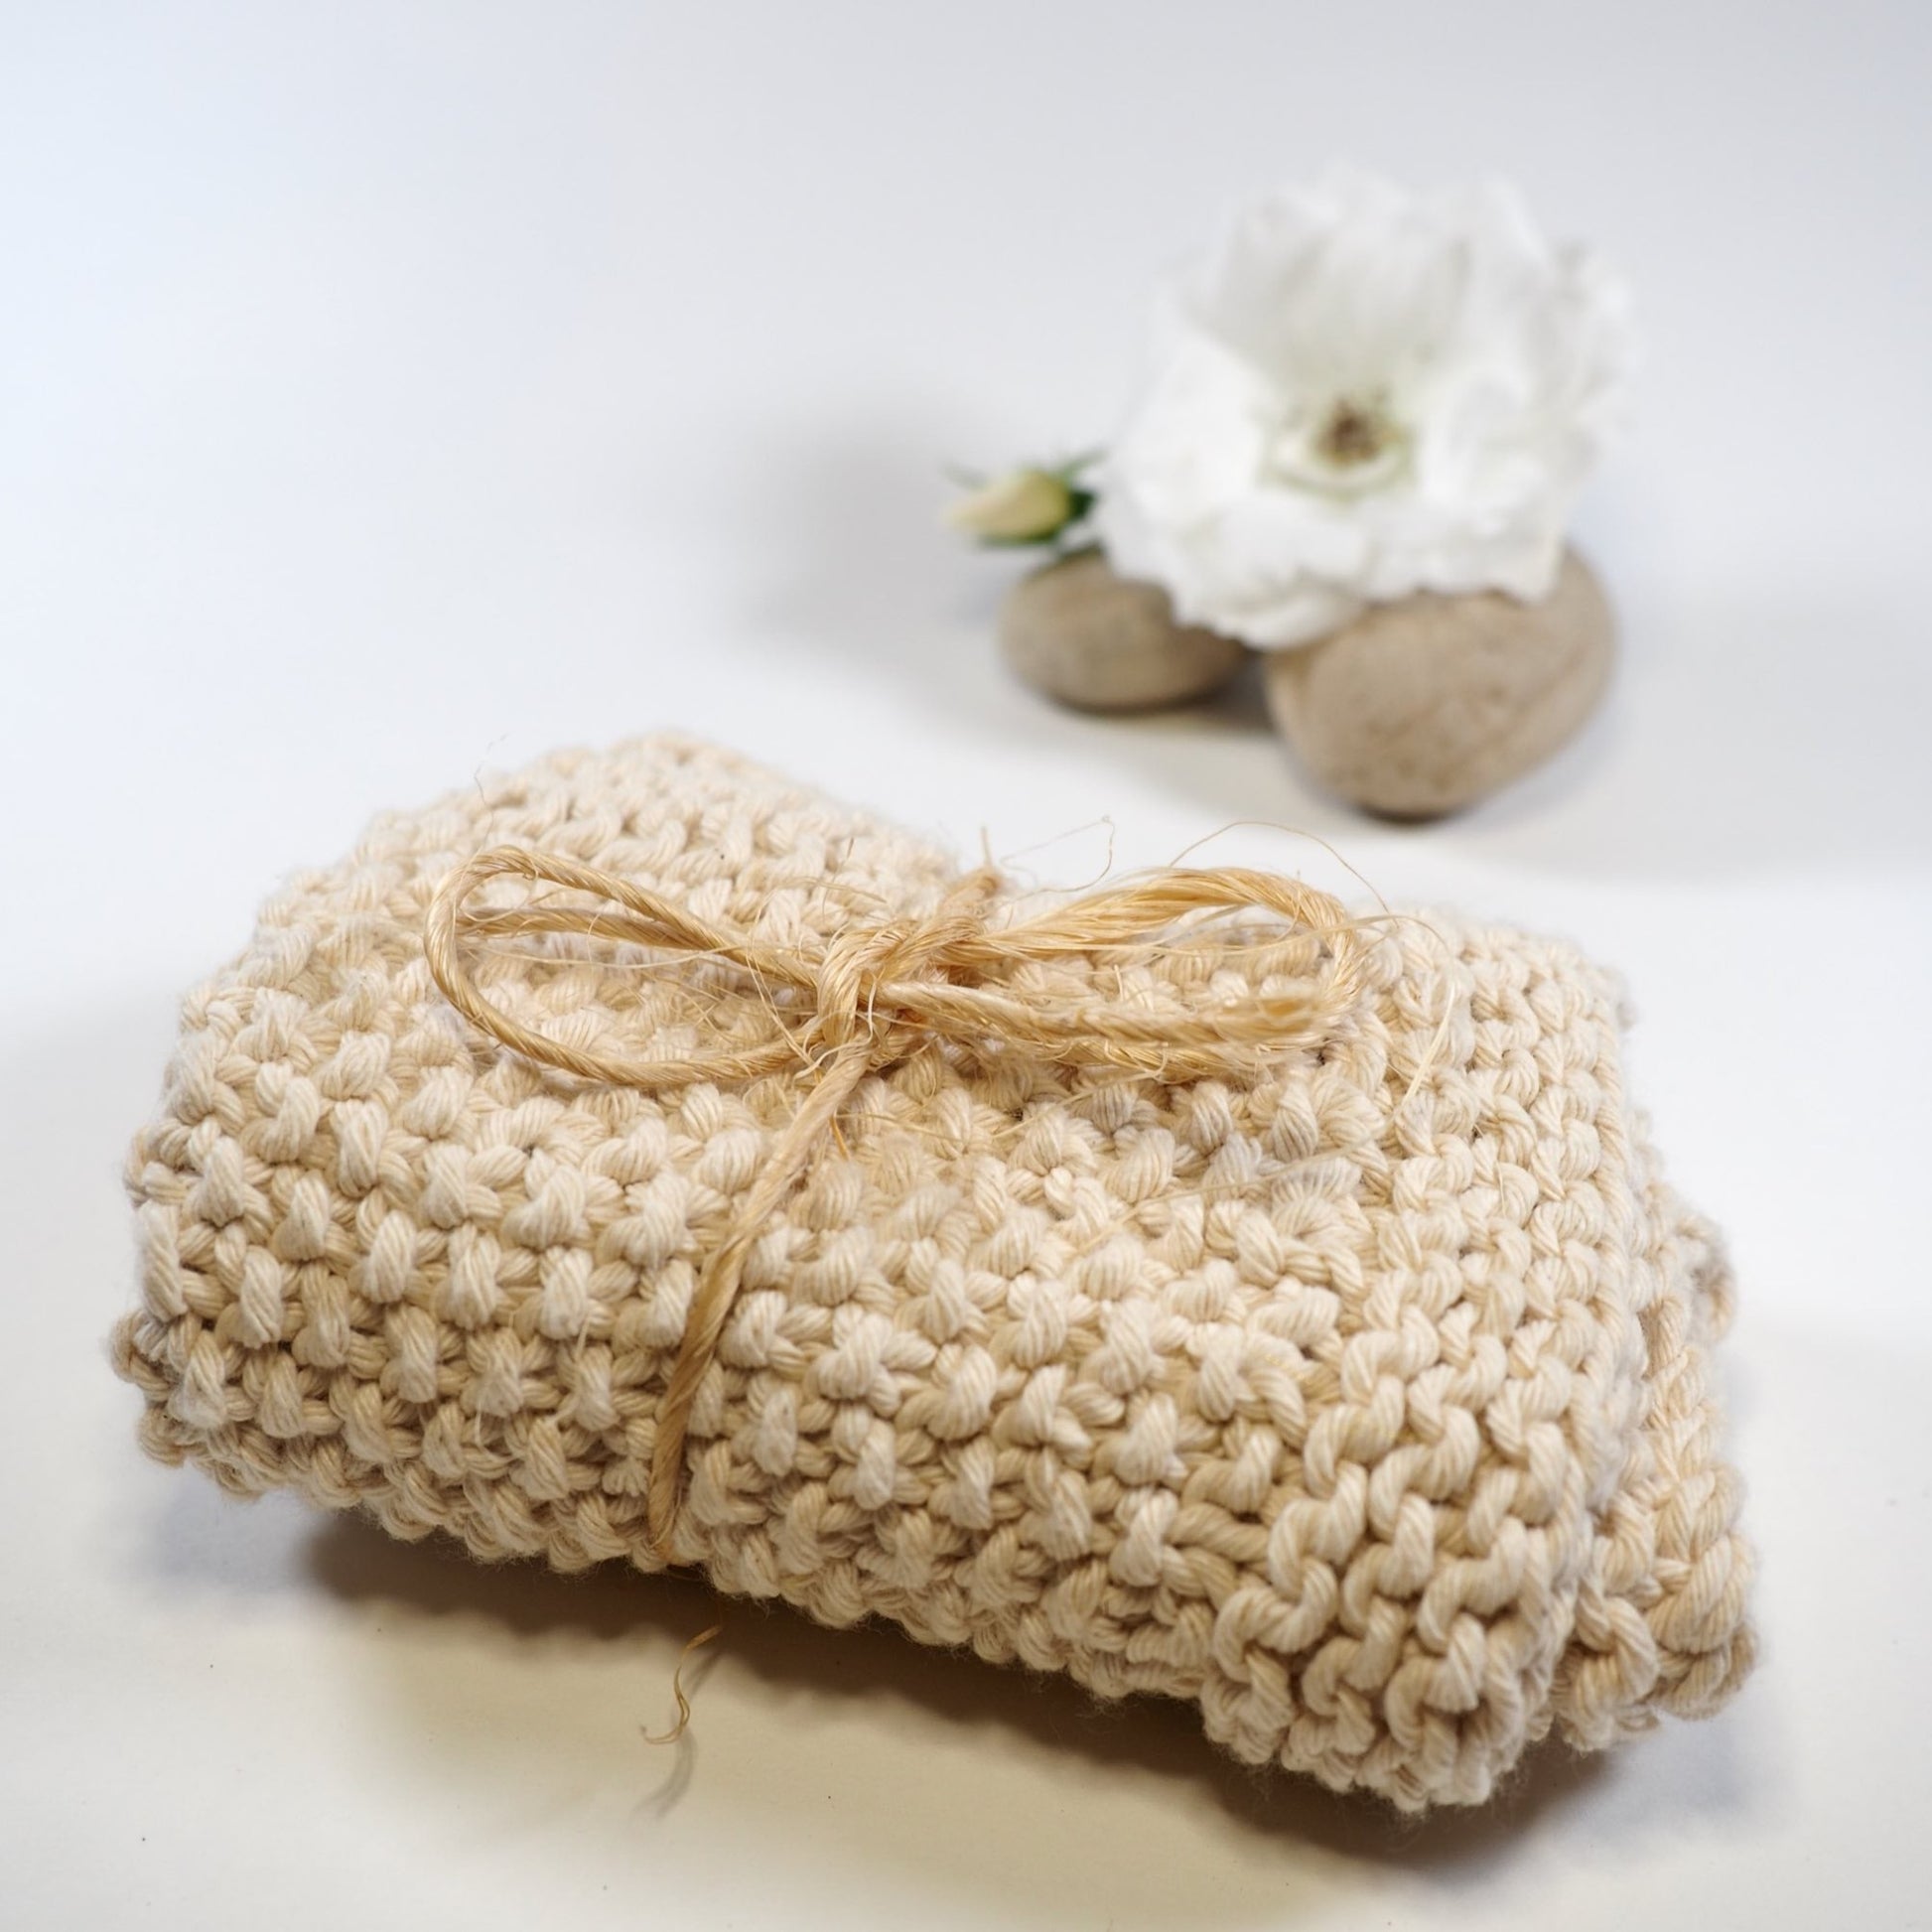 Hand knitted cotton face cloth tied with string with rock and rose. Provides gentle cleansing and exfoliation every day.